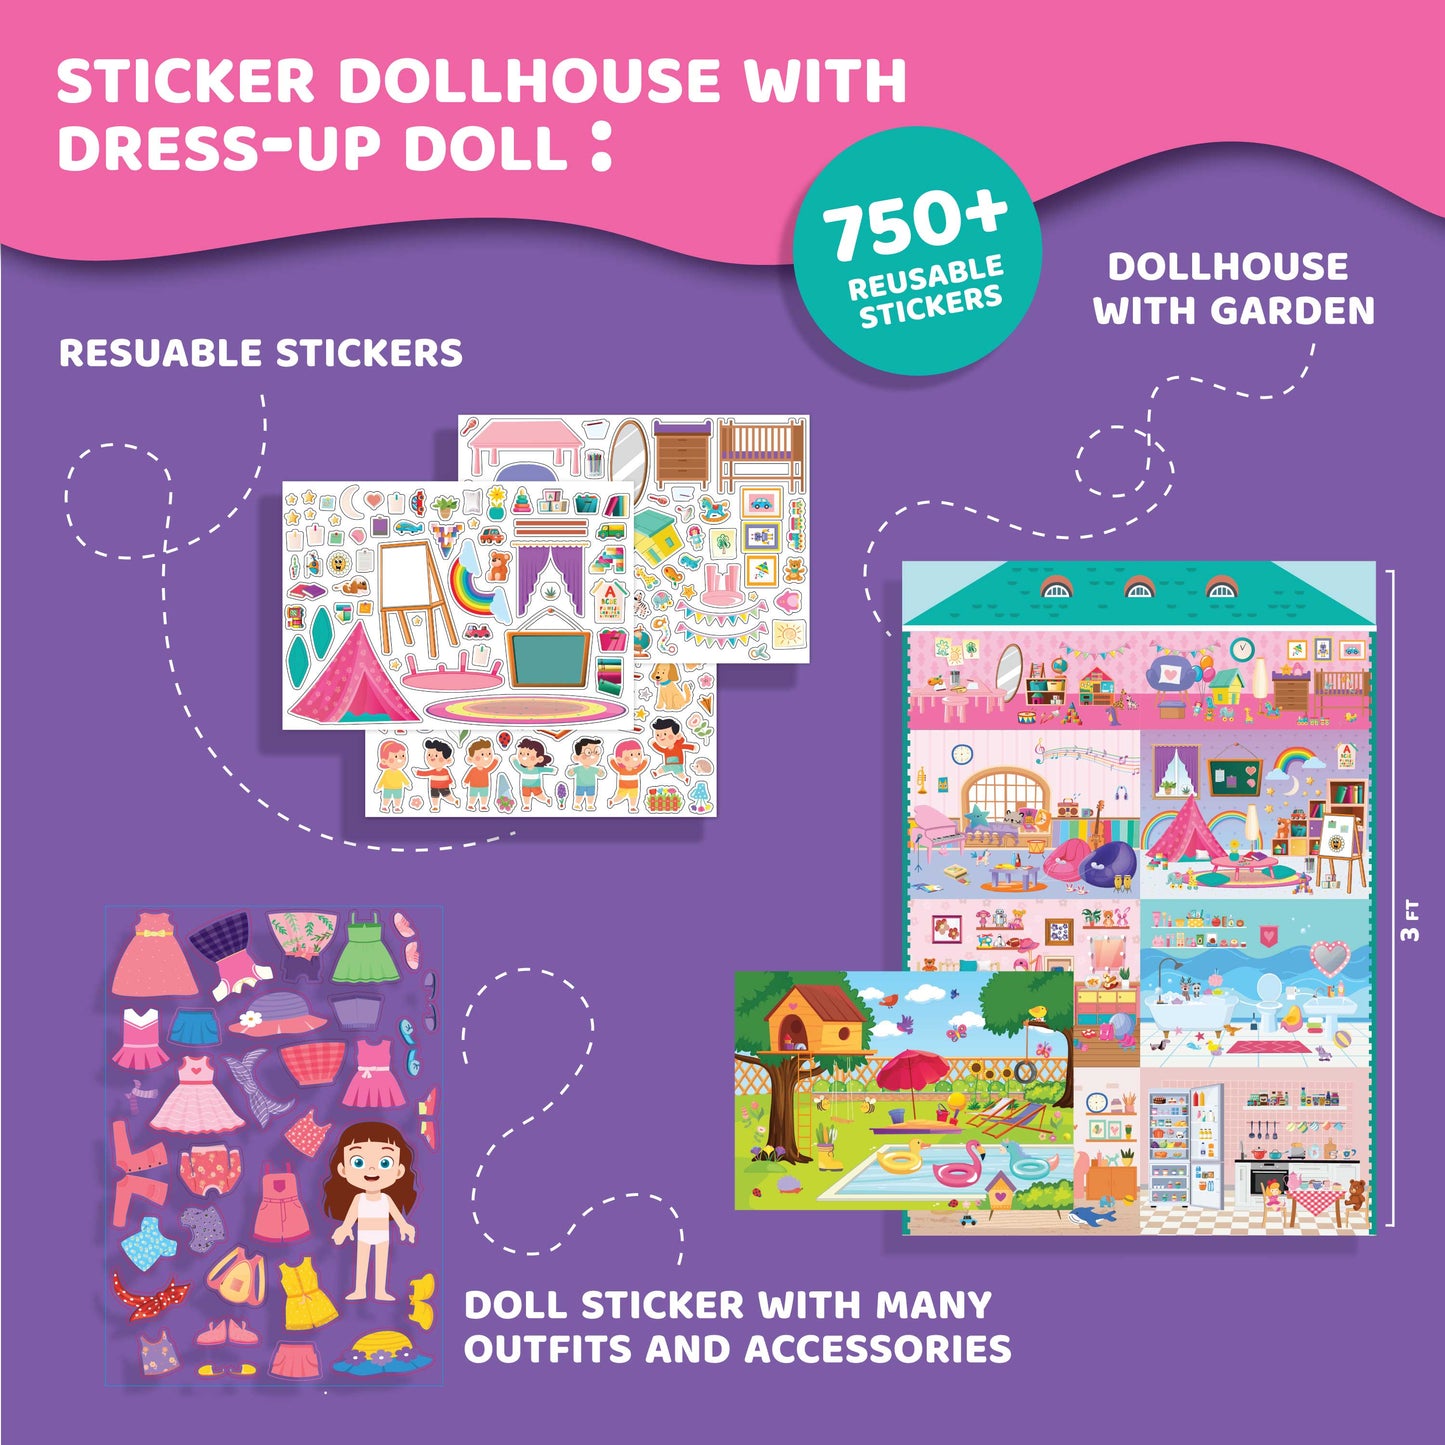 Sticker Dollhouse – Design Your Dream Doll House with 750+ Reusable Stickers, Interactive Pretend Play Set for Kids, Gifts for Girls Ages 3 4 5 6 7 8